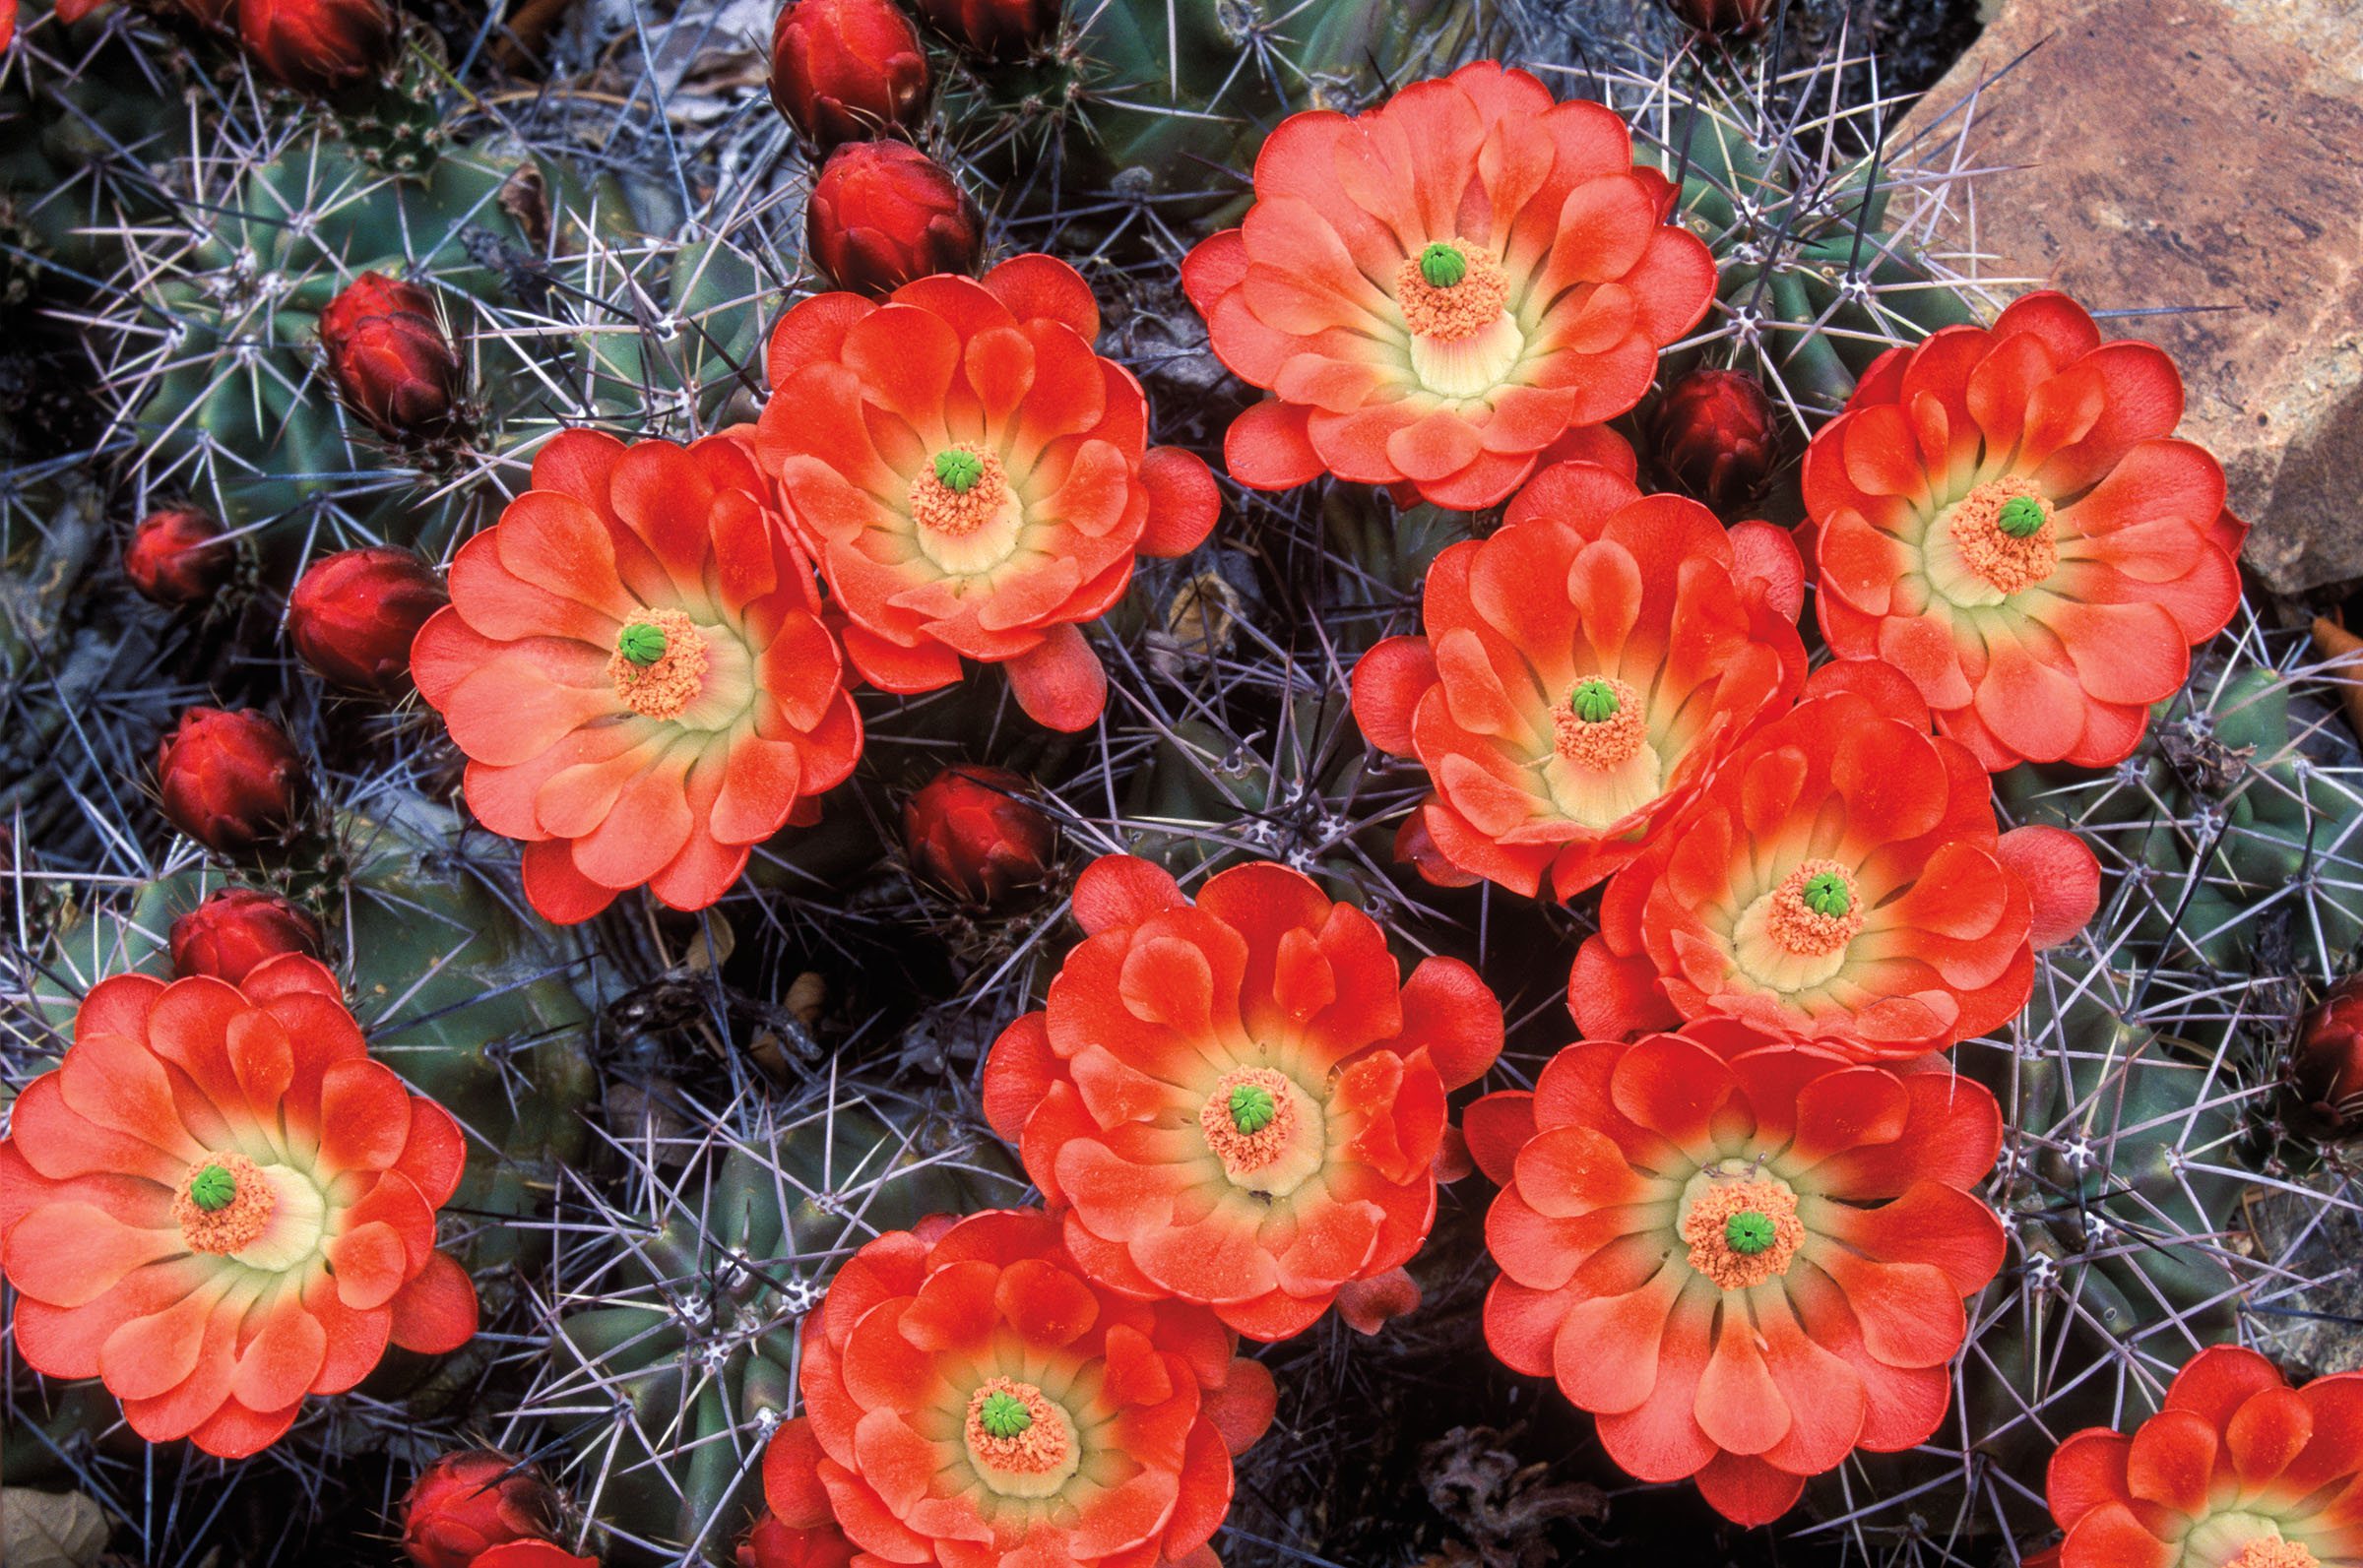 Flowers grow among cacti in the Big Bend region